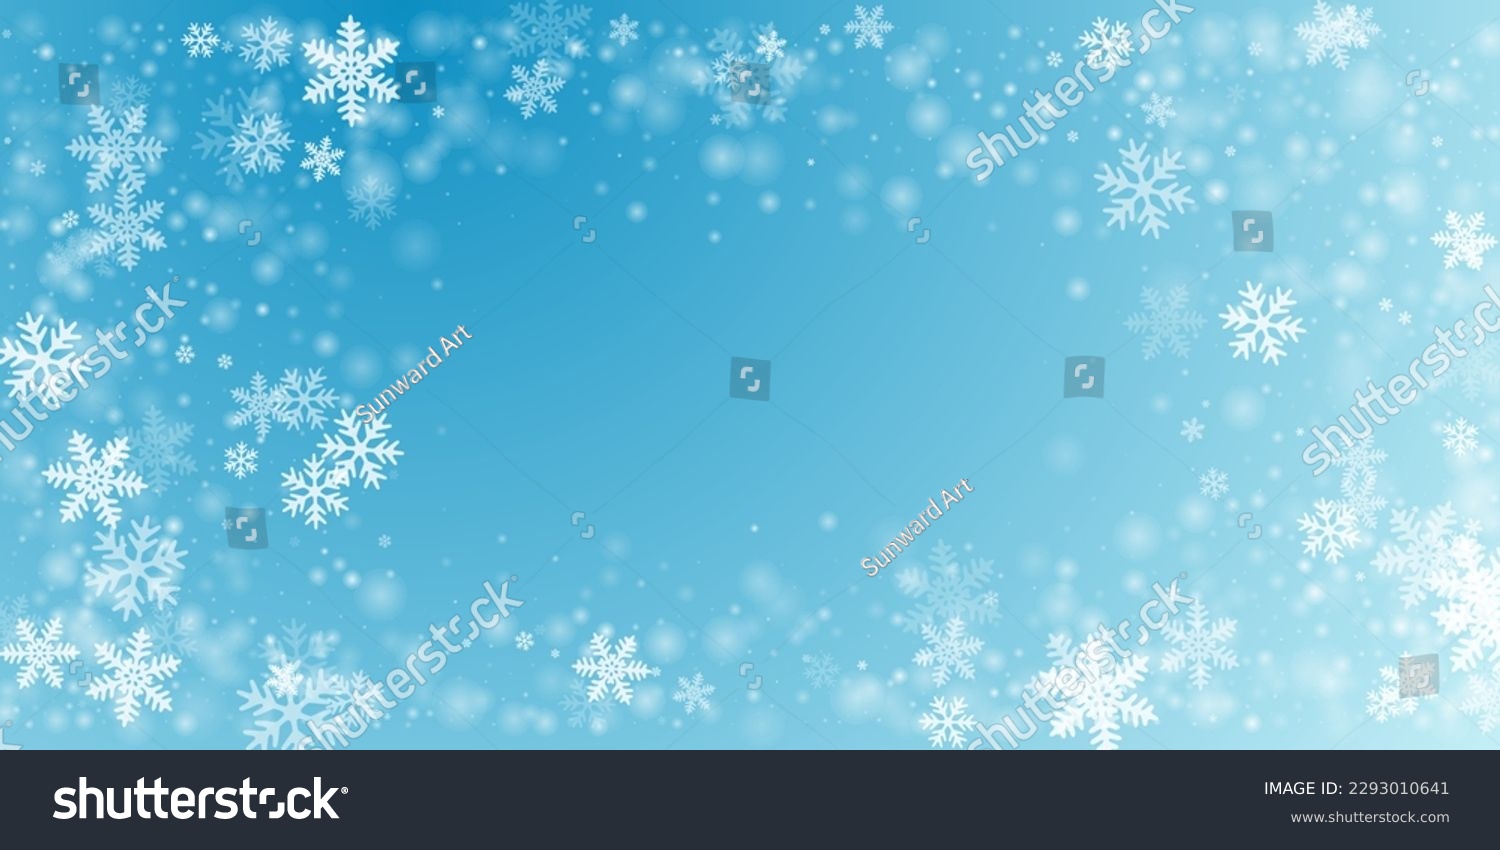 Magical heavy snowflakes backdrop. Winter fleck frozen shapes. Snowfall sky white teal blue pattern. Shimmering snowflakes january texture. Snow nature scenery. #2293010641